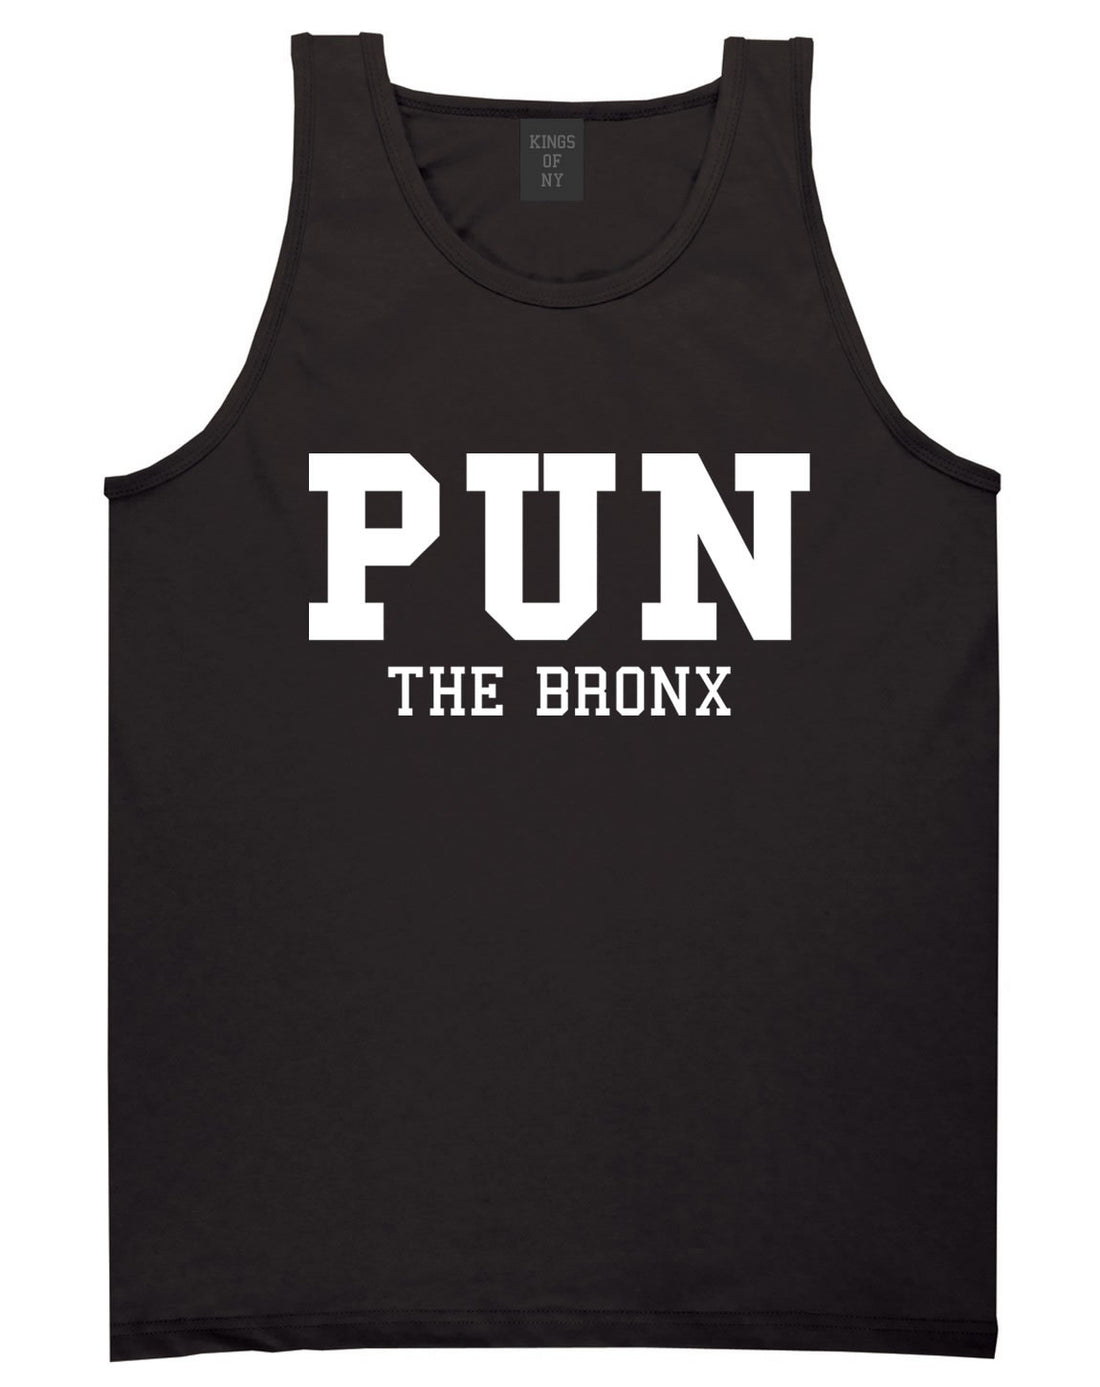 Pun The Bronx Tank Top in Black by Kings Of NY